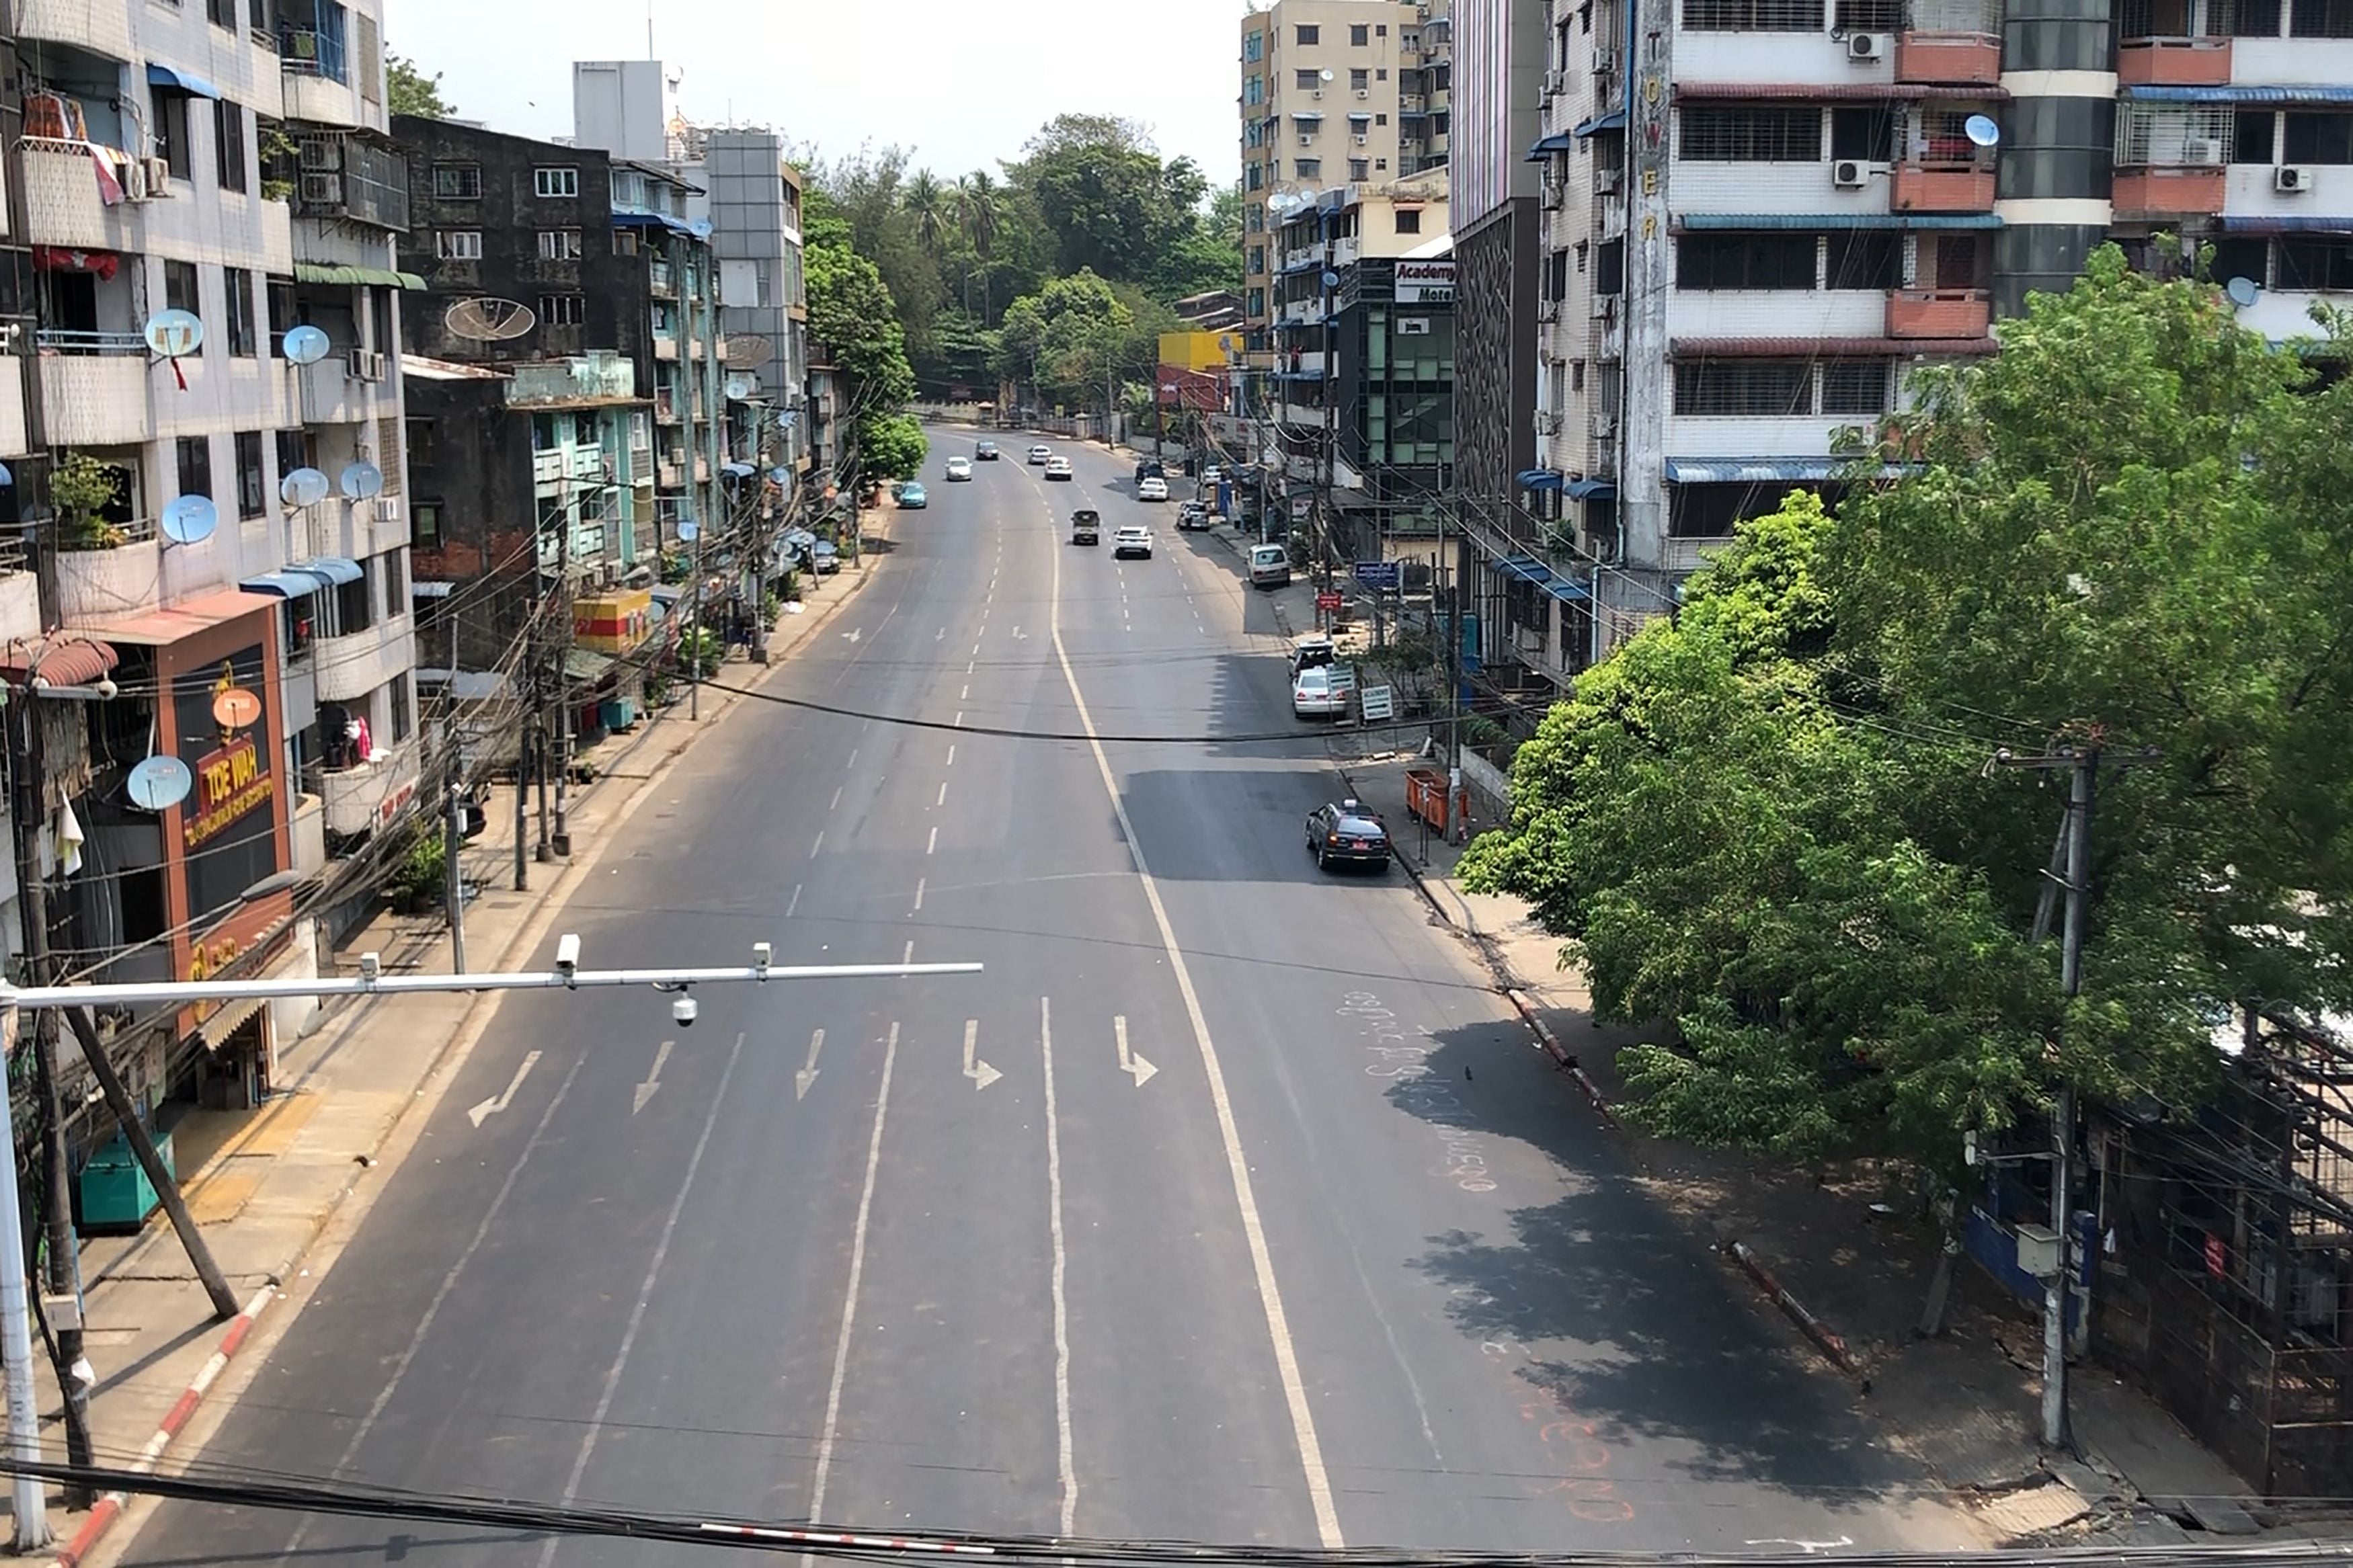 Screengrab provided via AFPTV shows an empty street in Yangon as demonstrators called for a “silent strike” on 24 March